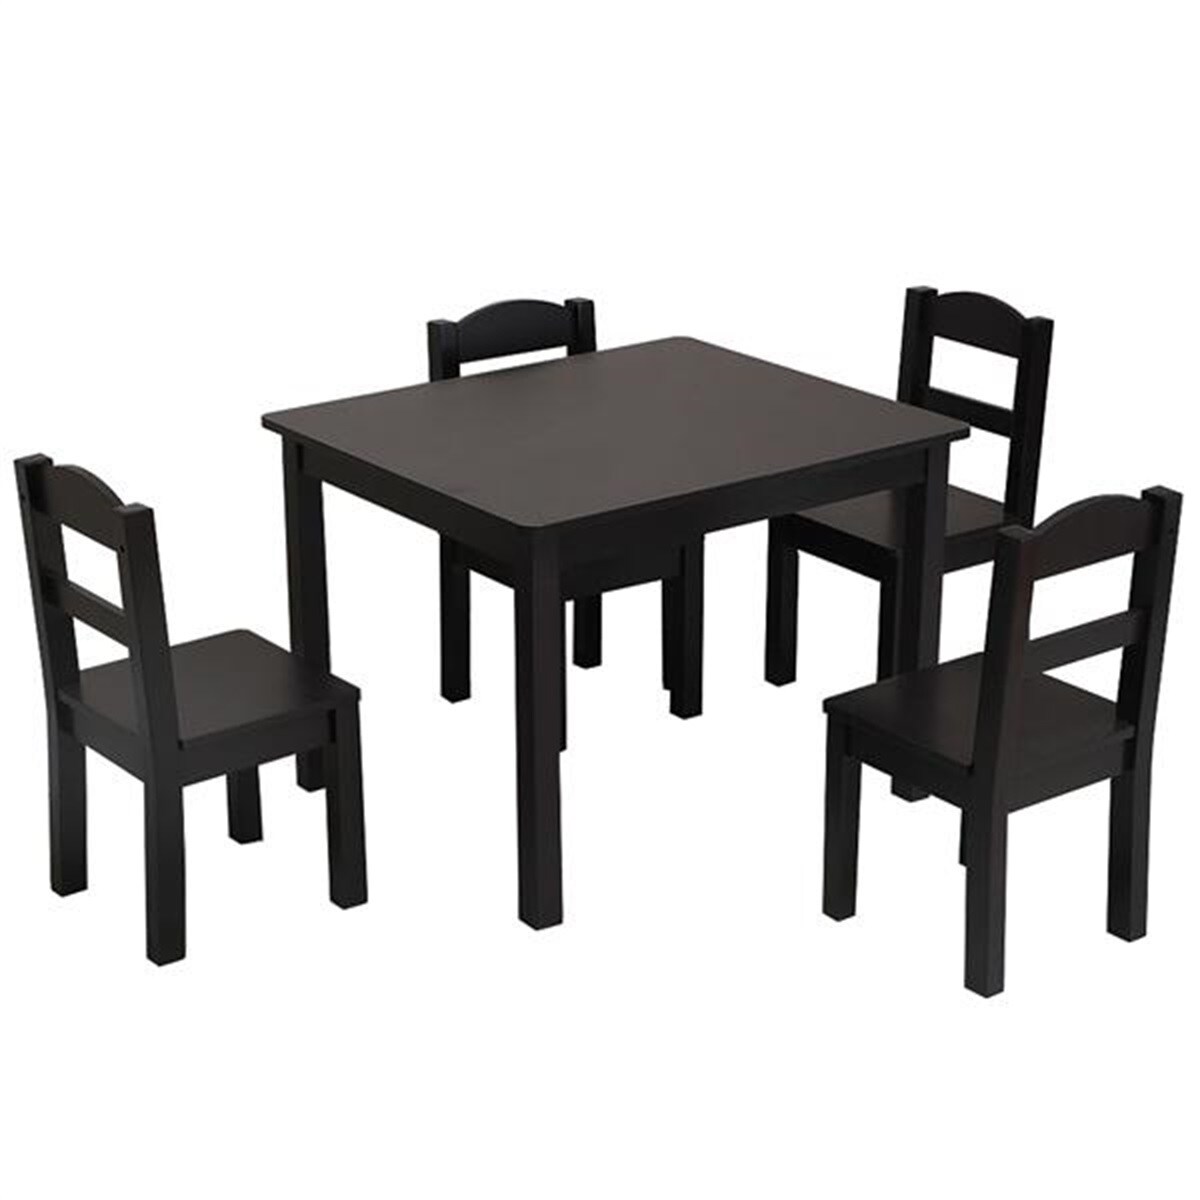 kids wooden table and chair set